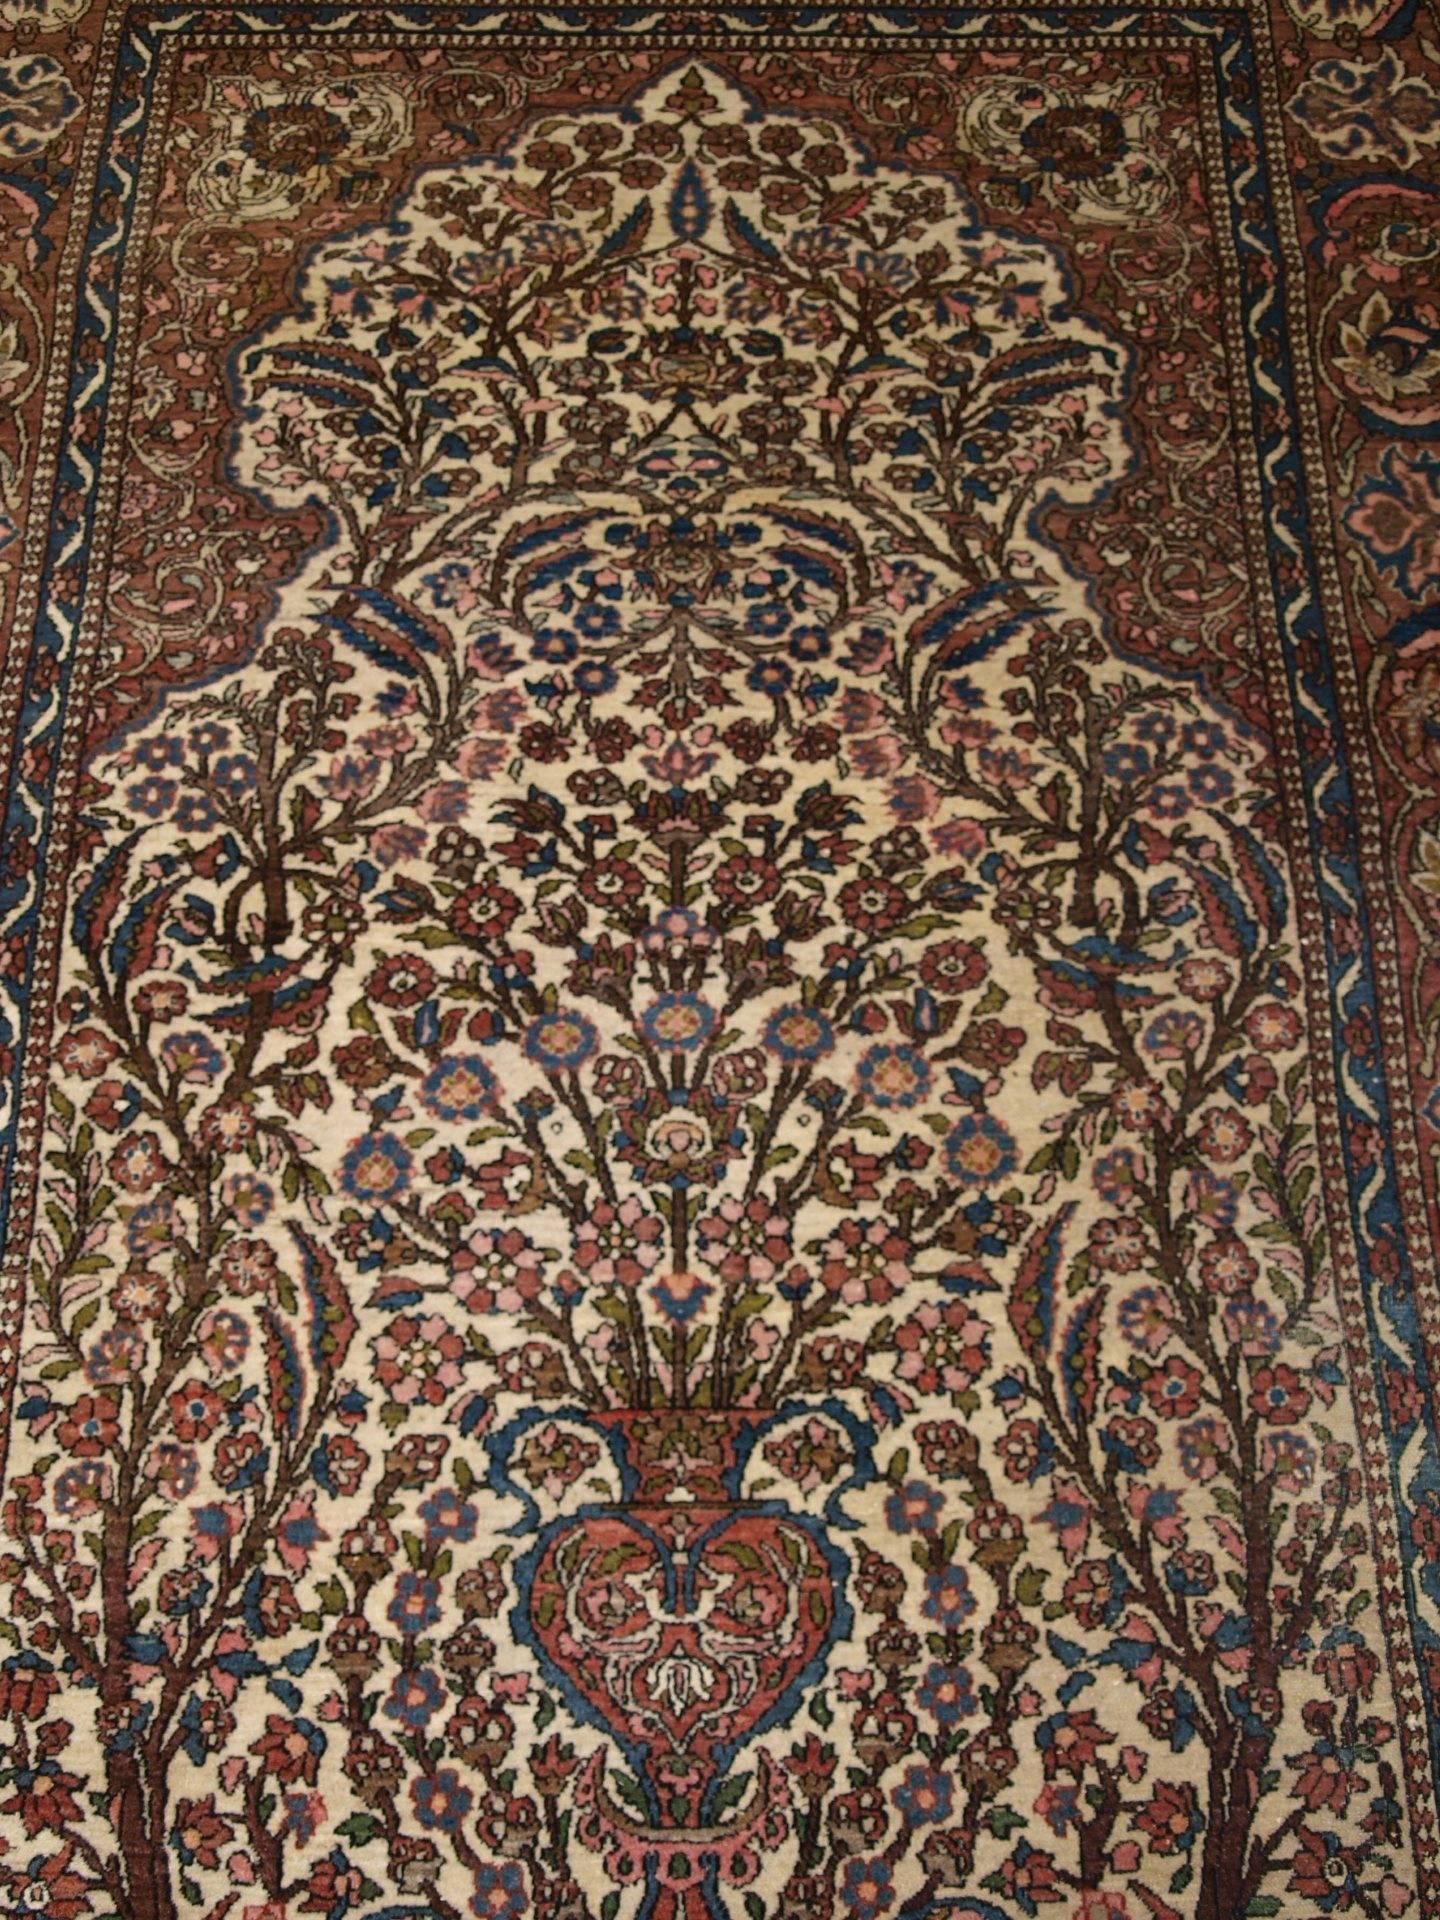 Wool Isfahan Prayer Rug with a Very Traditional Floral Vase Design, circa 1900 For Sale